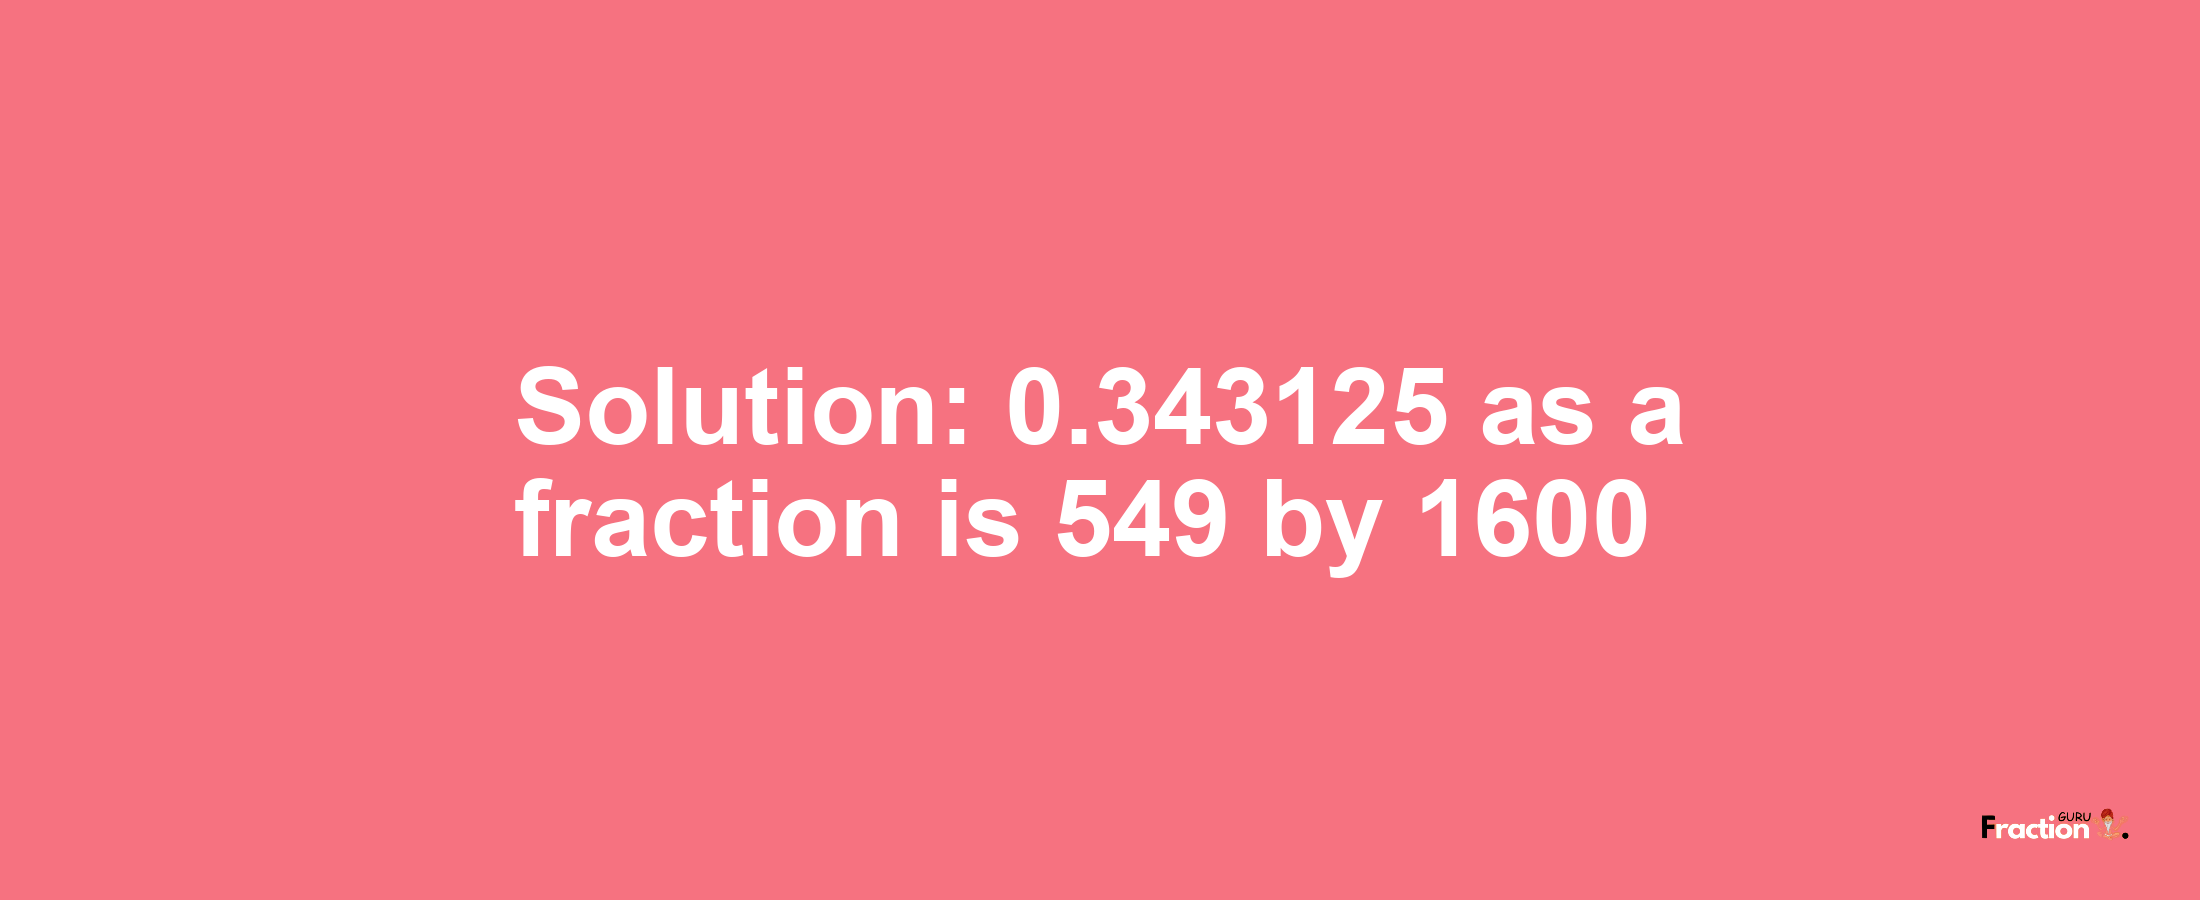 Solution:0.343125 as a fraction is 549/1600